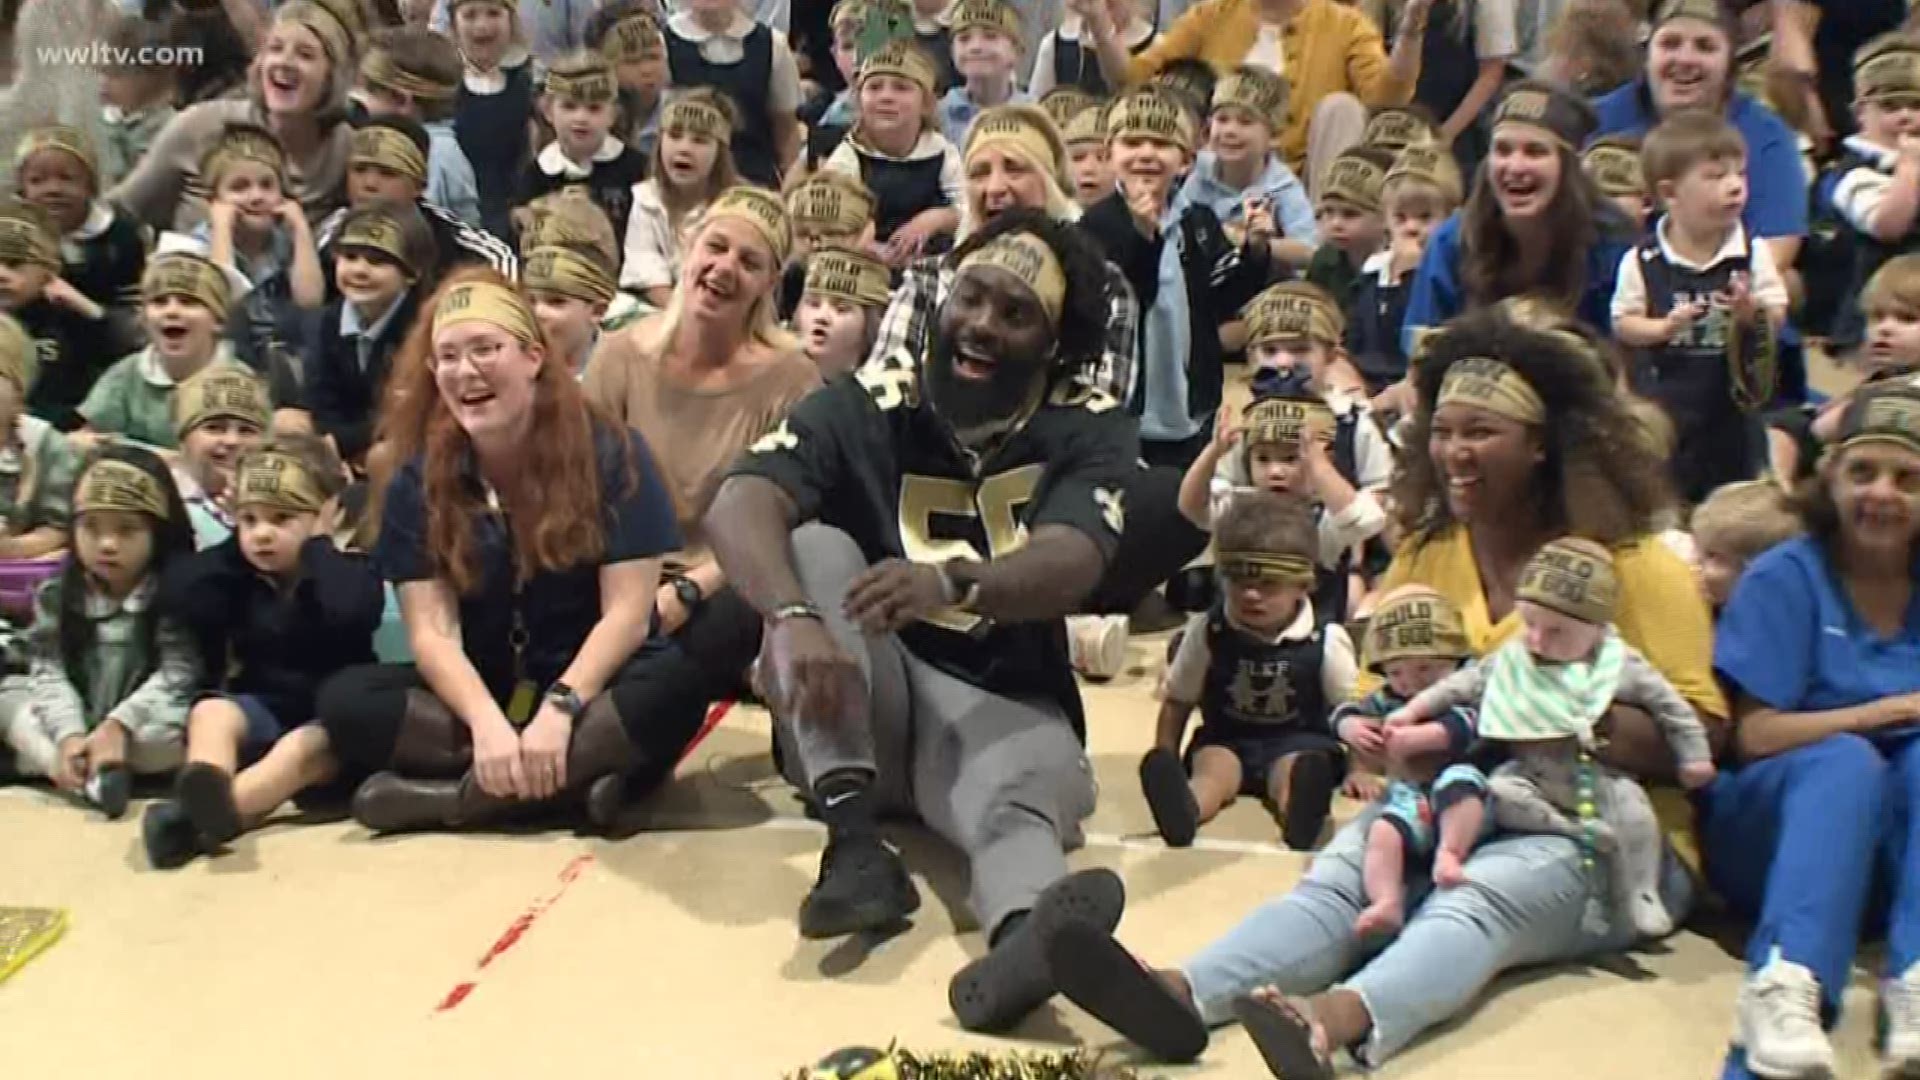 With his headbands, the linebacker has already raised more than $200,000 to help build a new emergency room for St. Dominic Memorial Hospital in Jackson, MS.